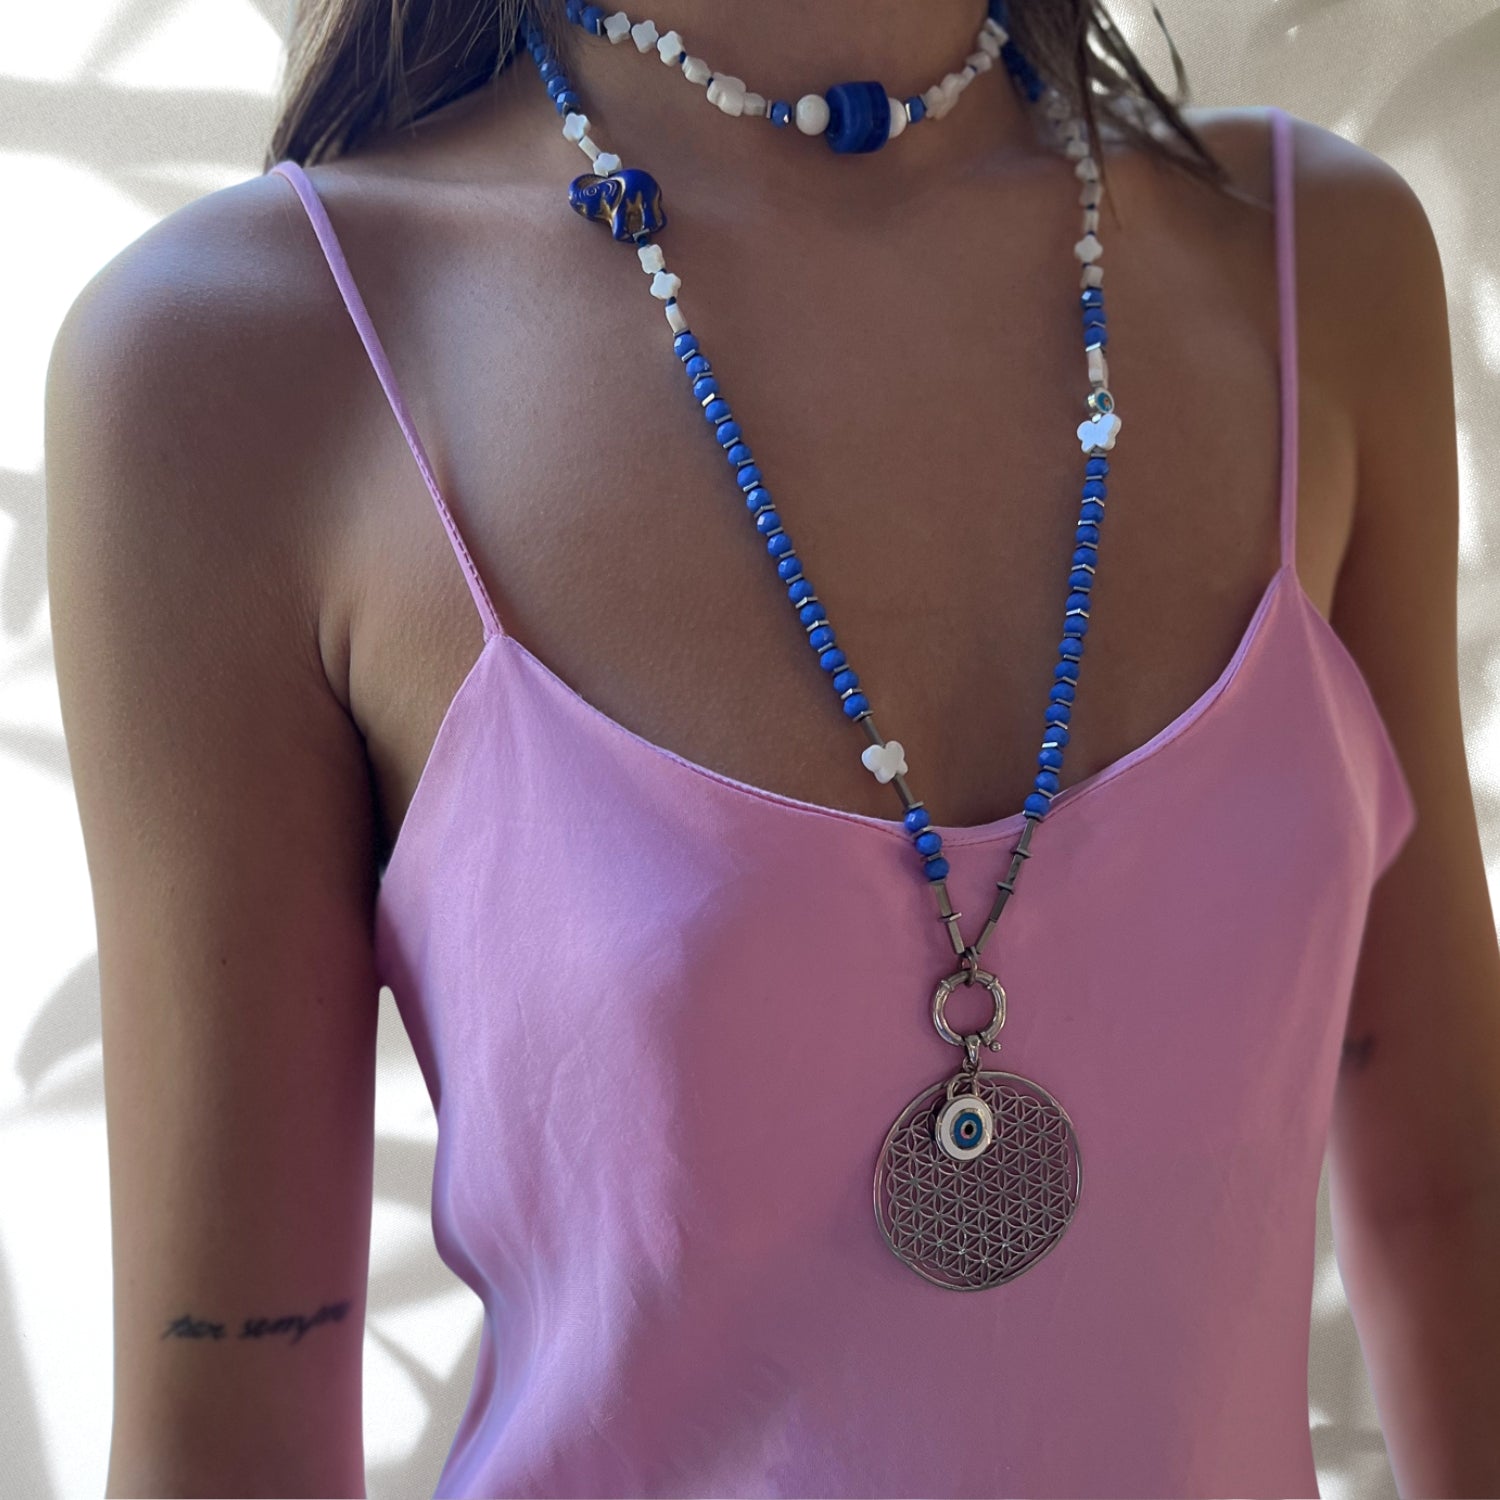 Stylish model wearing Flower of Life Necklace - Meticulously crafted piece with pearl butterfly and flower beads, African elephant charm, and evil eye beads, perfect for showcasing fashion and symbolism